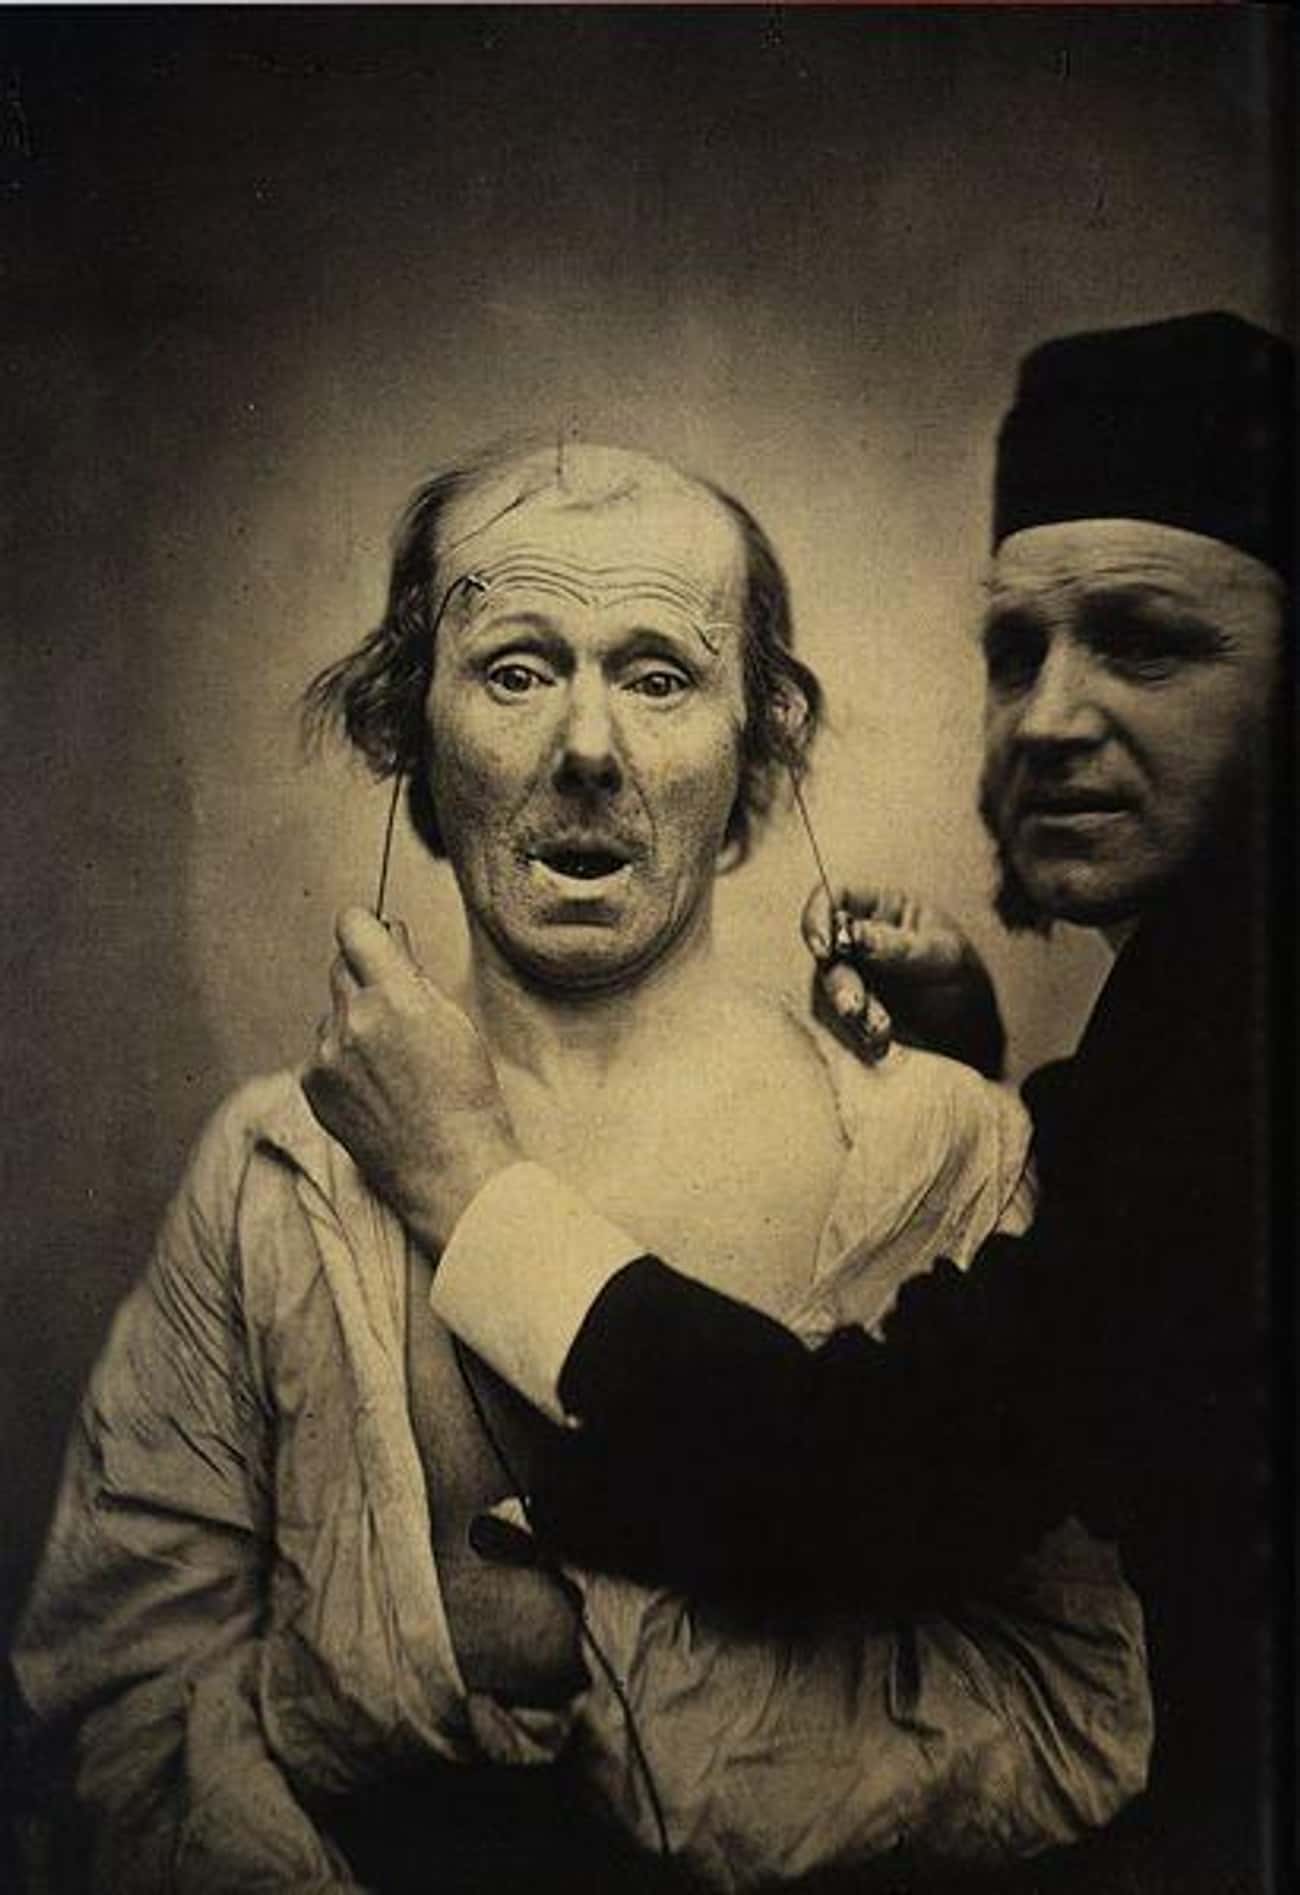 Mid-19th Century: Facial Electrostimulus Experiment Photos By Guillaume Duchenne 